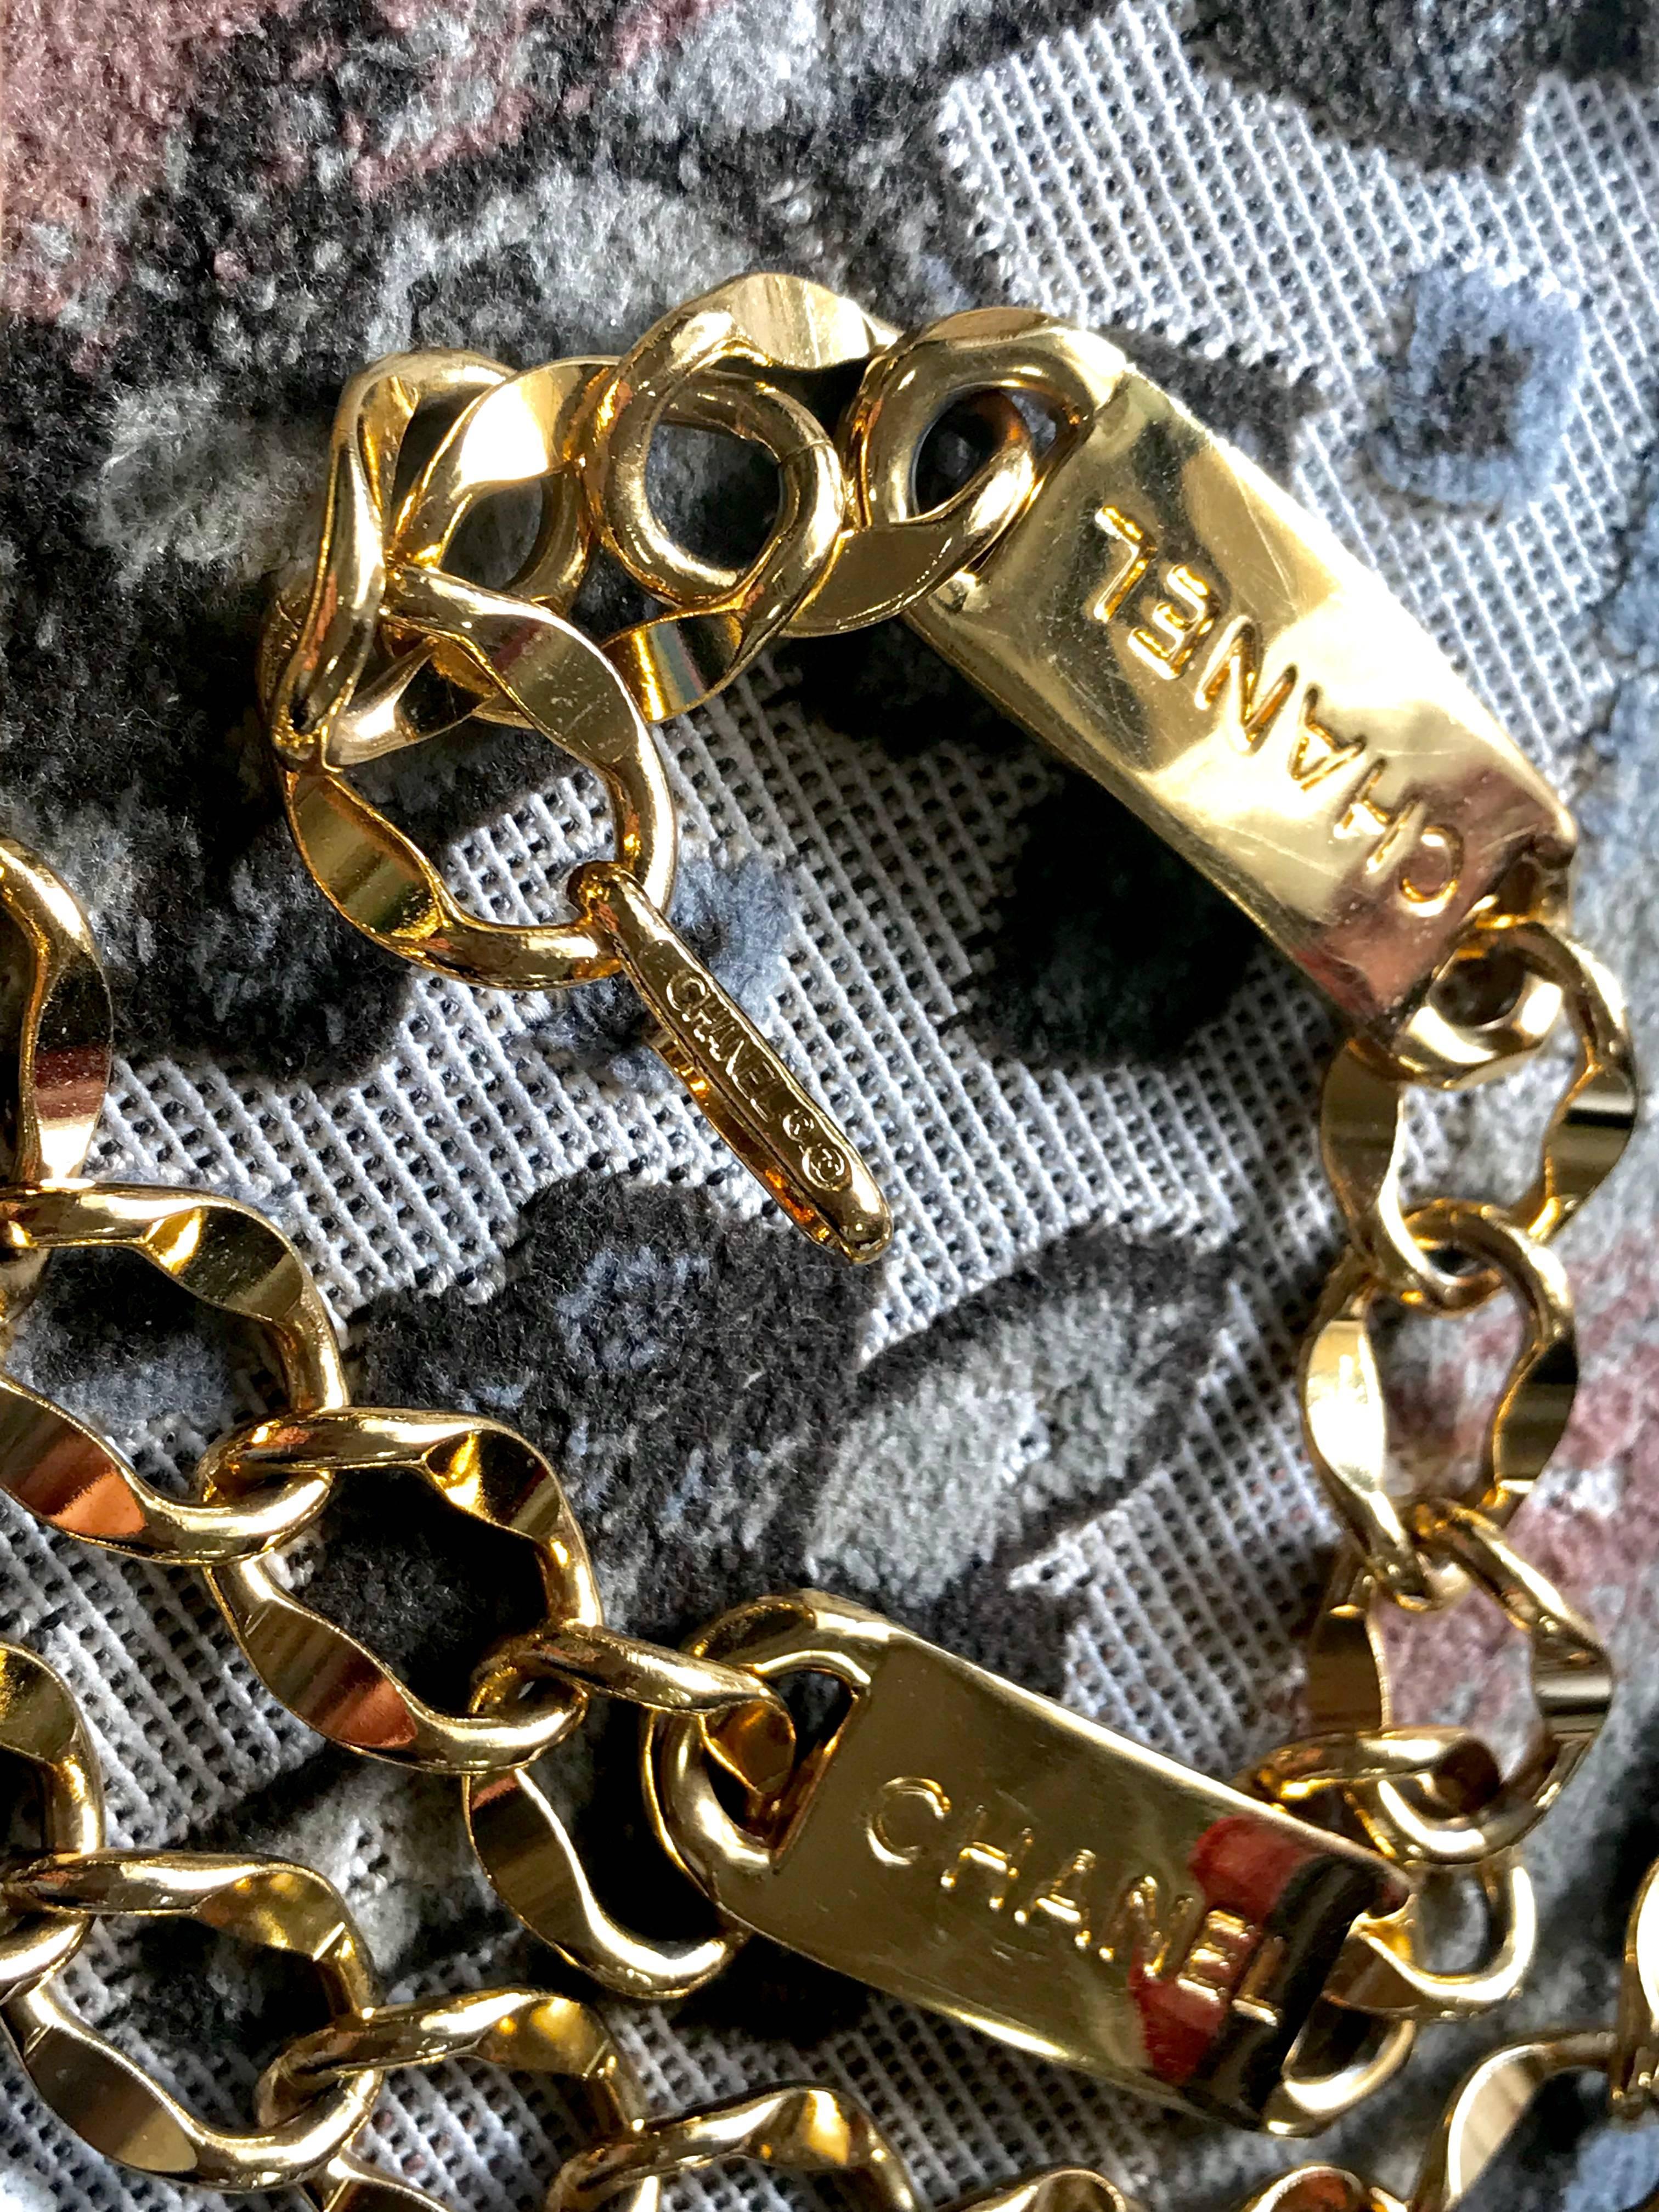 MINT. 80's Vintage CHANEL golden thick chain belt with logo engraved bar motifs. 2